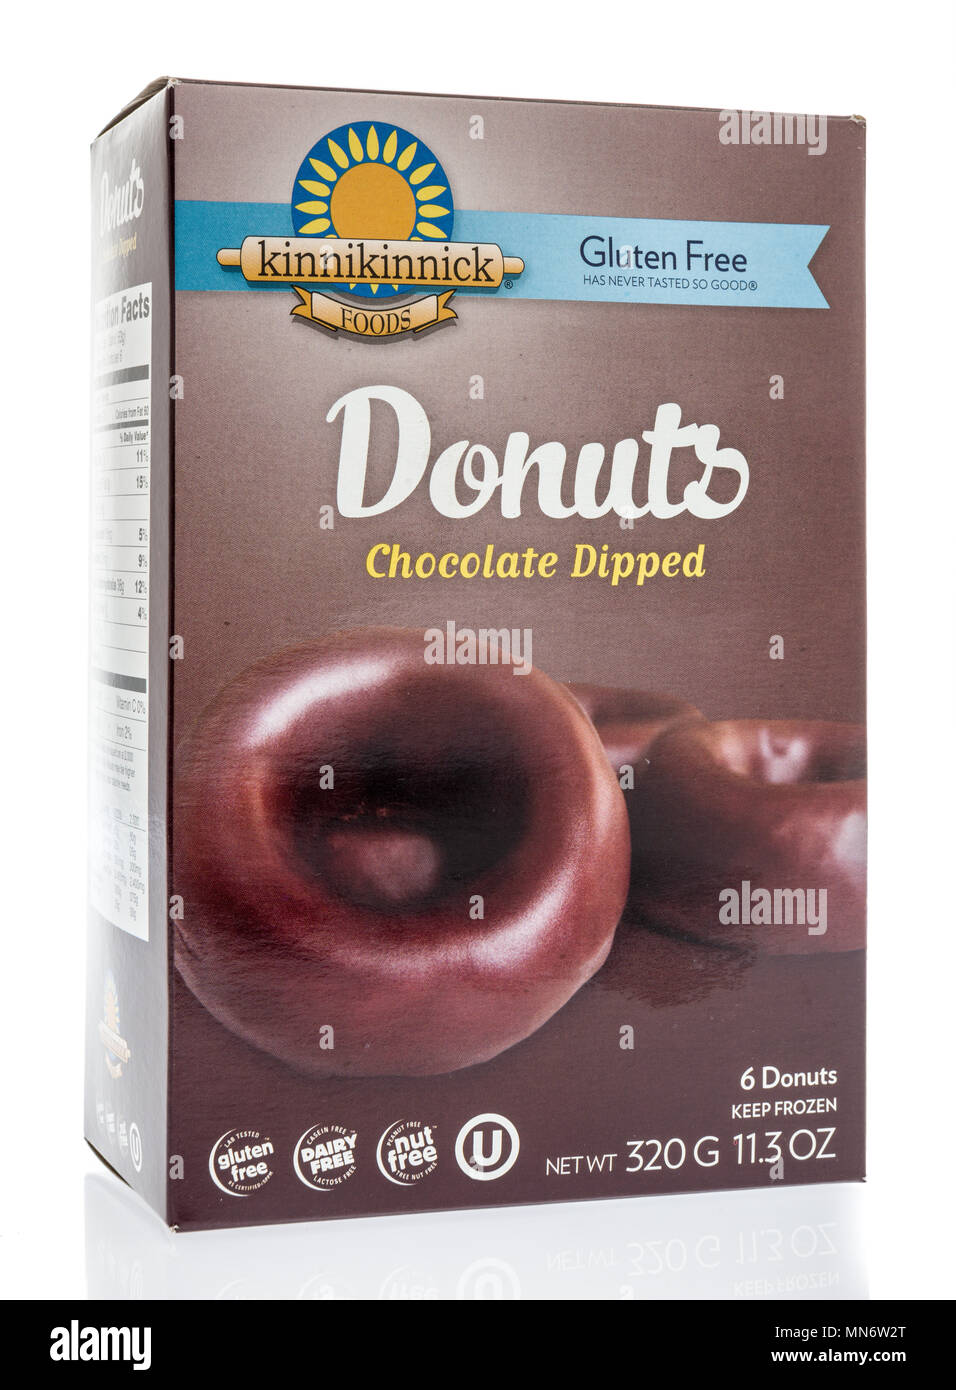 Winneconne, WI - 8 May 2018:  A box of Kinnikinnick foods donuts chocolate dipped on an isolated background Stock Photo